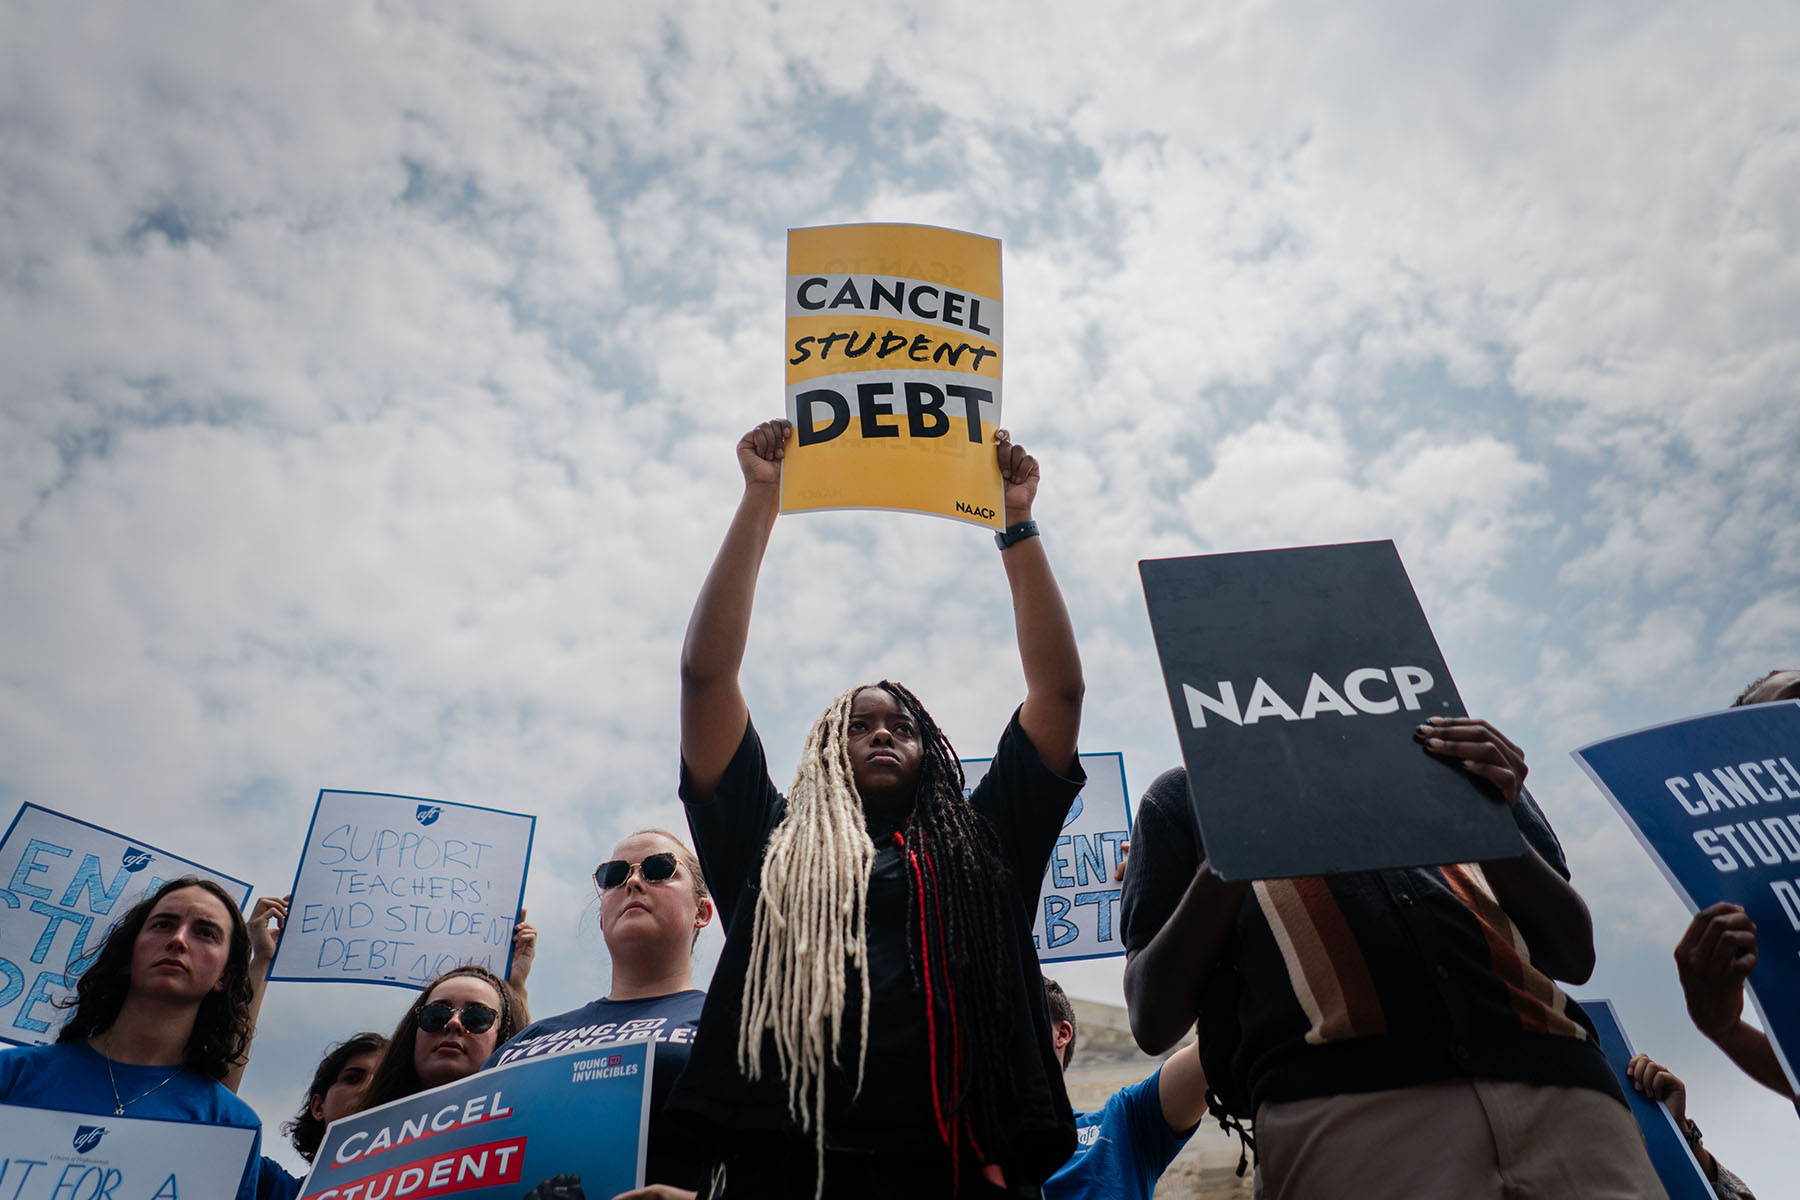 Protesters hold "Cancel Student Debt" sign outside of the Supreme Court of the United States after the nation's high court stuck down President Biden's student debt relief program.